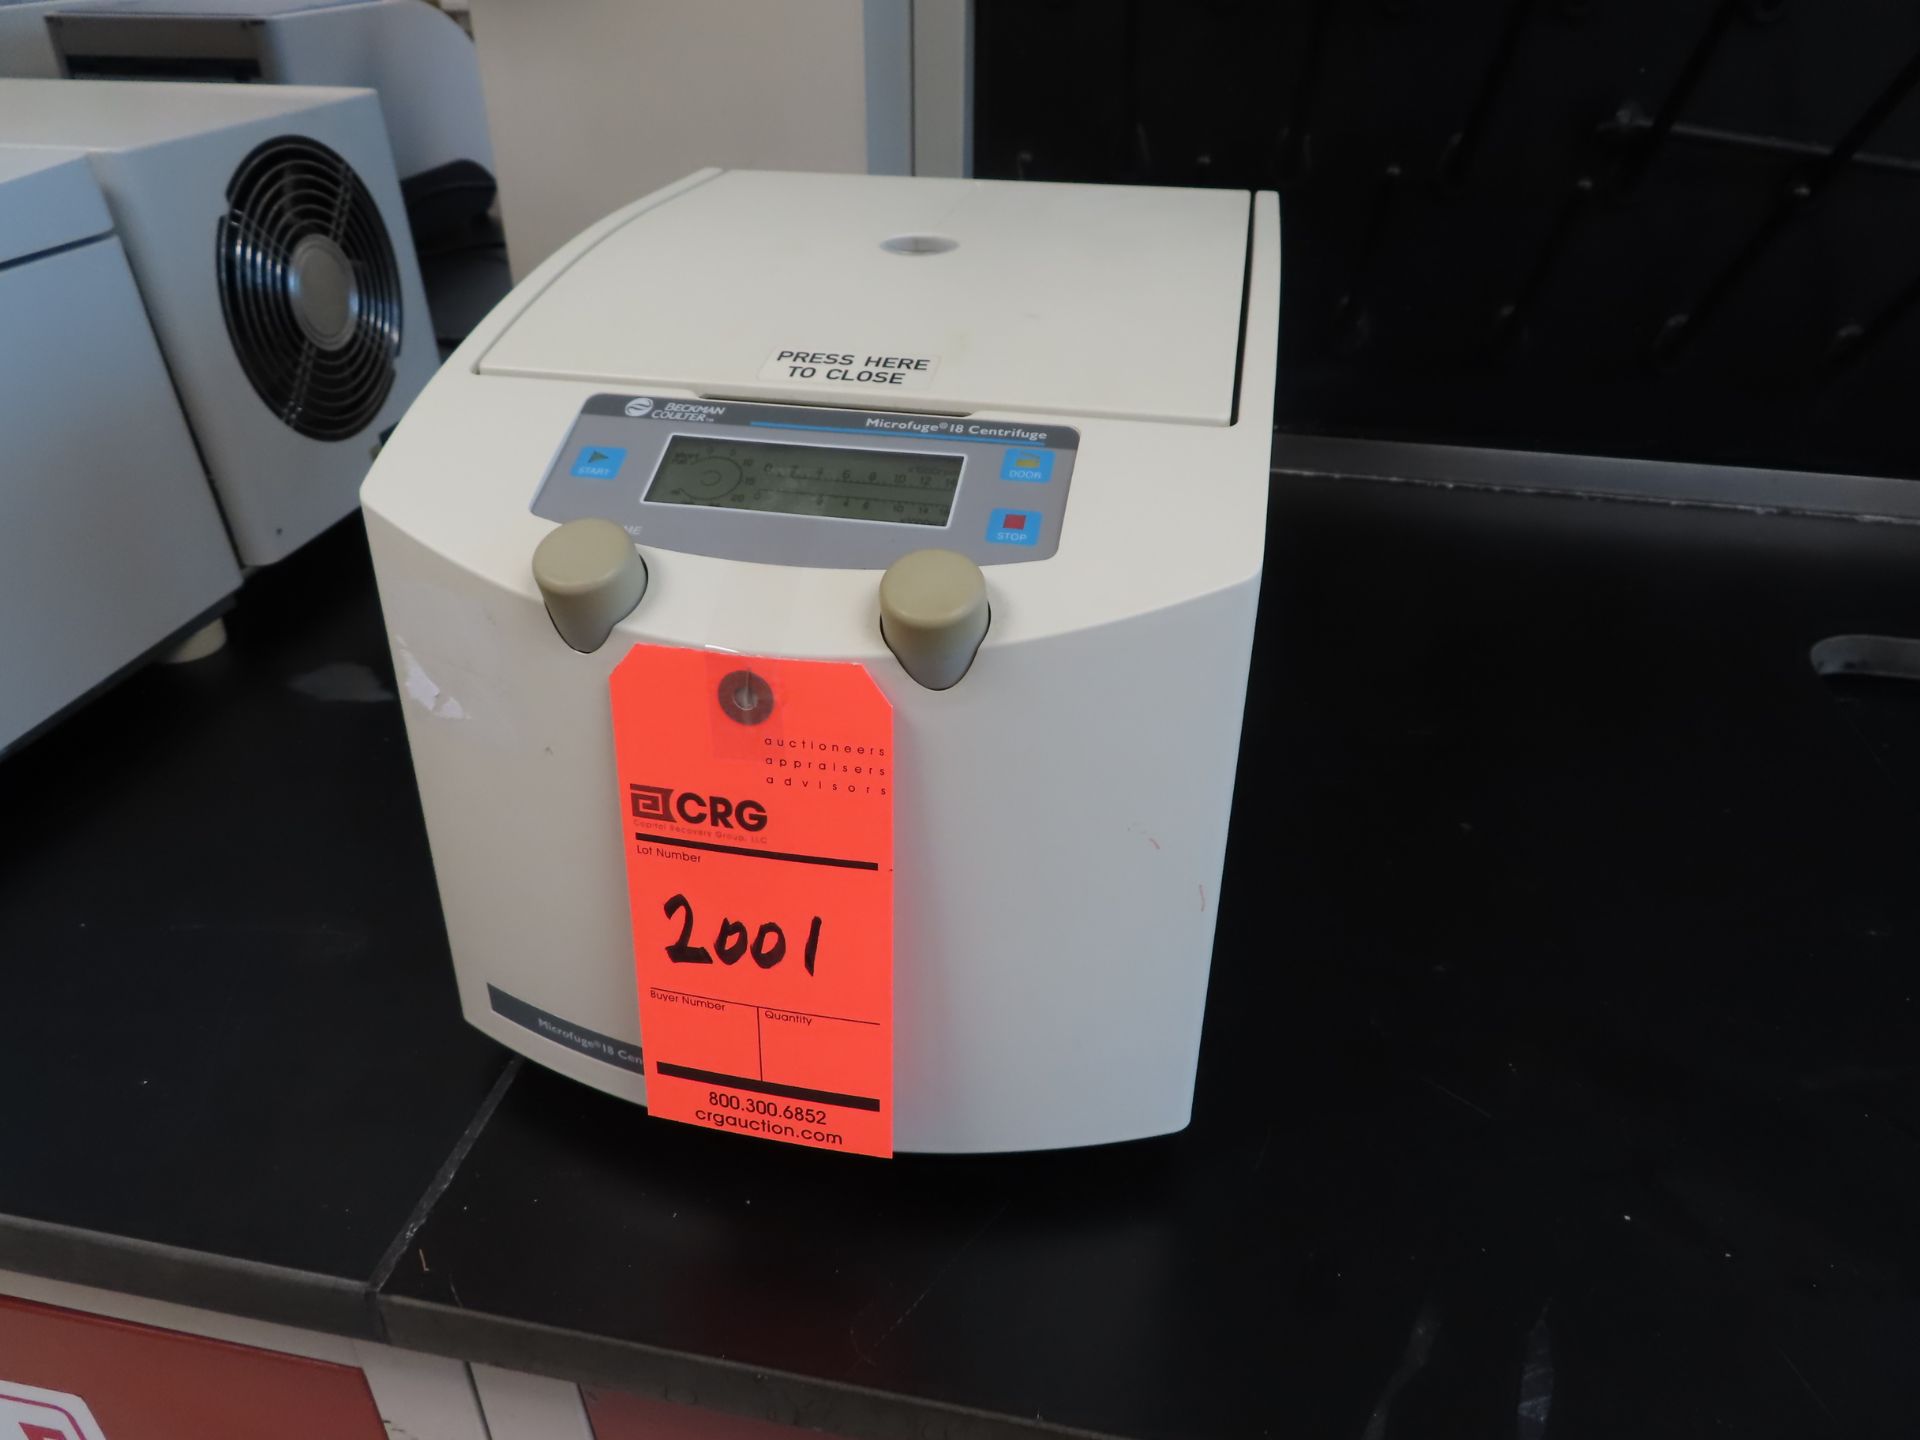 Beckman Coulter Microfuge 18 centrifuge, located C wing, 3rd floor, room 353E